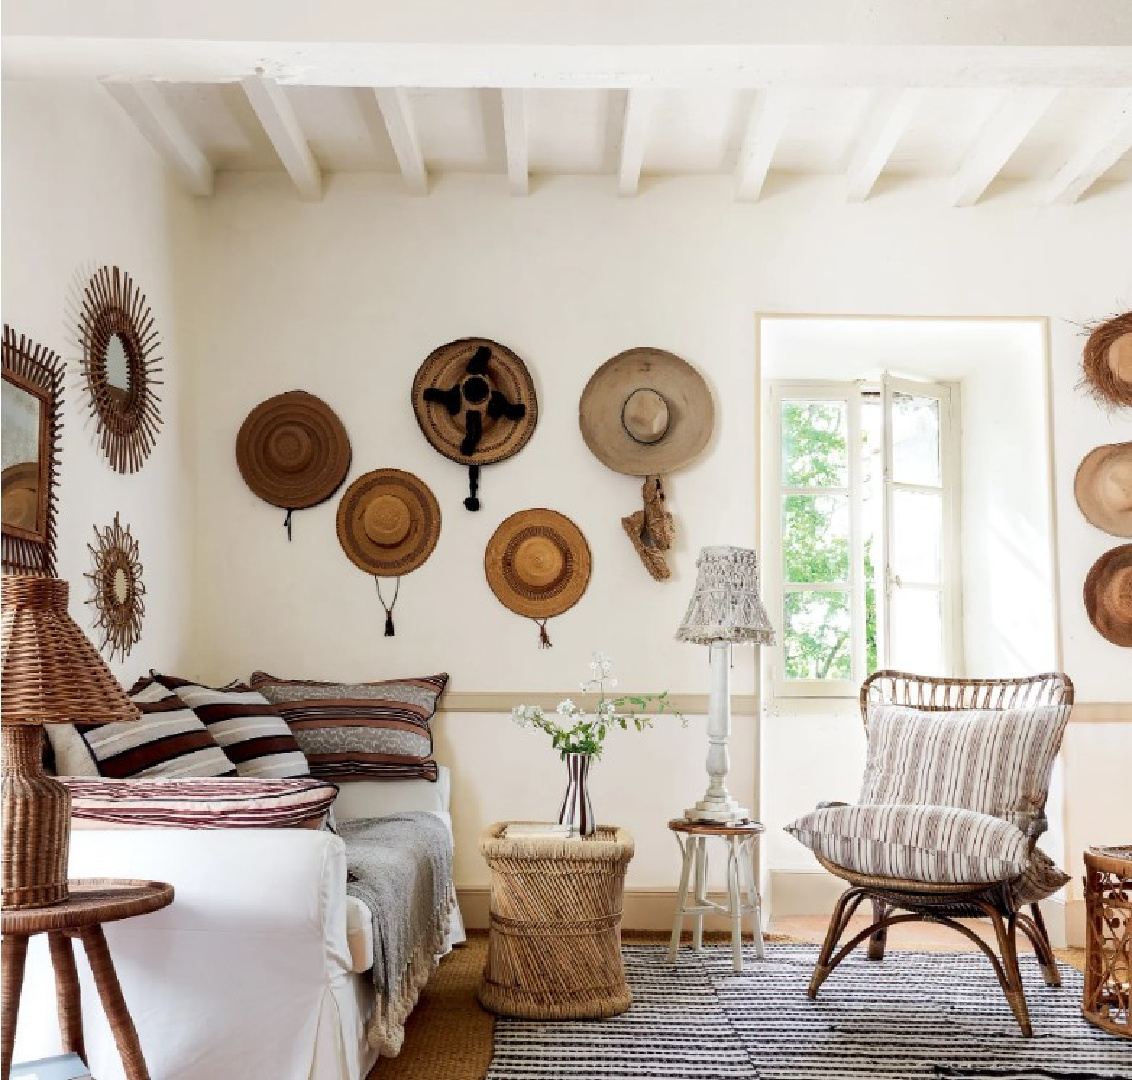 Eclectic living room with baskets on walls and rustic wood beams in a 19th century French cottage in Toulouse by Lucinda Chambers - photo by Paul Massey. #frenchcottage #frenchfarmhouse #interiordesign